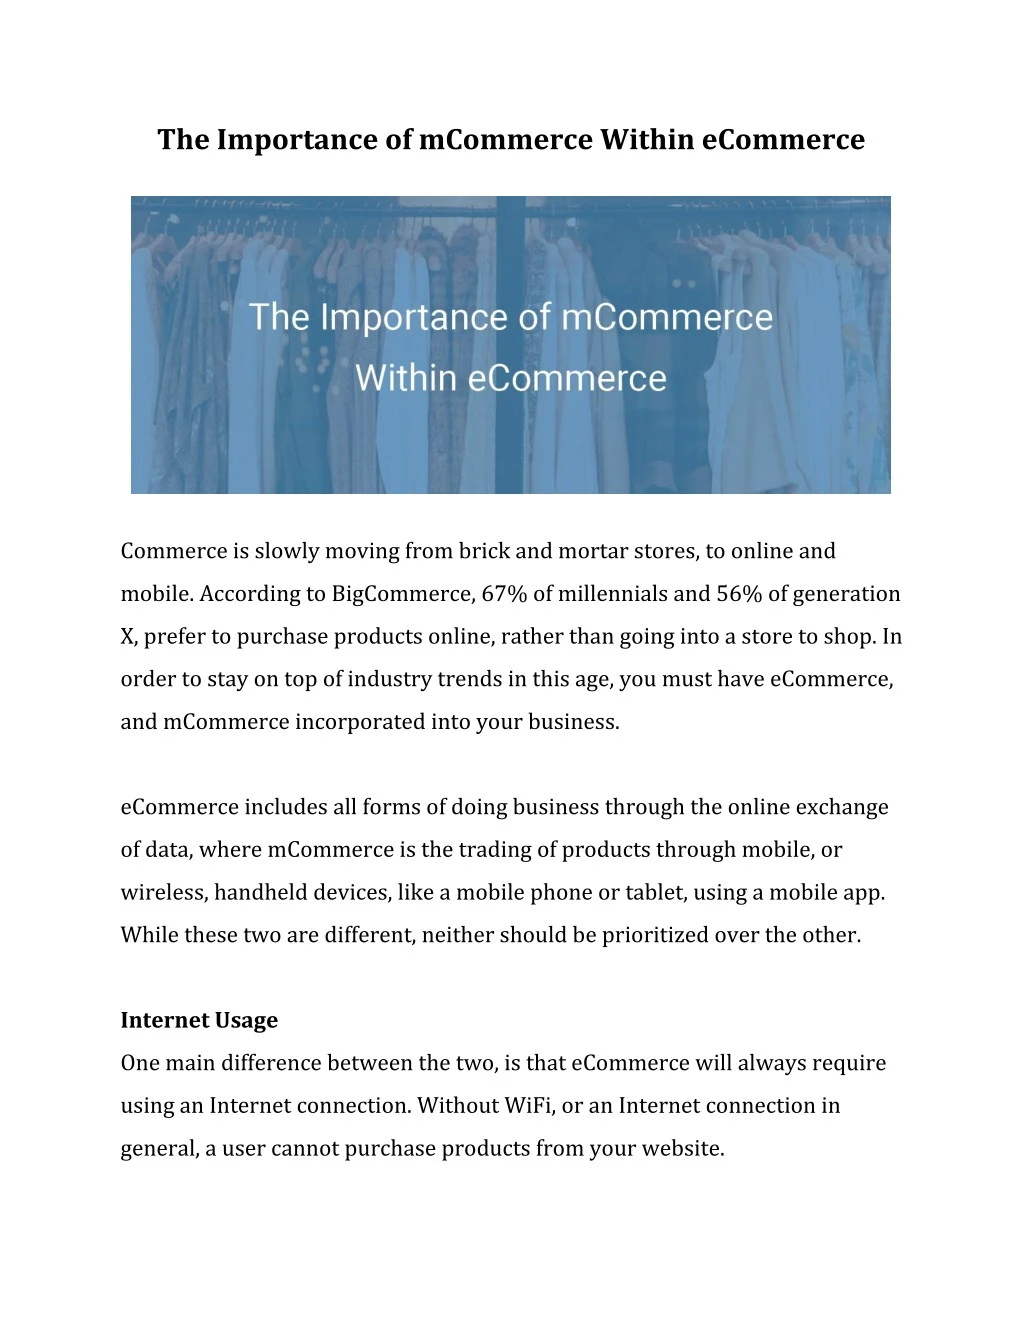 the importance of mcommerce within ecommerce